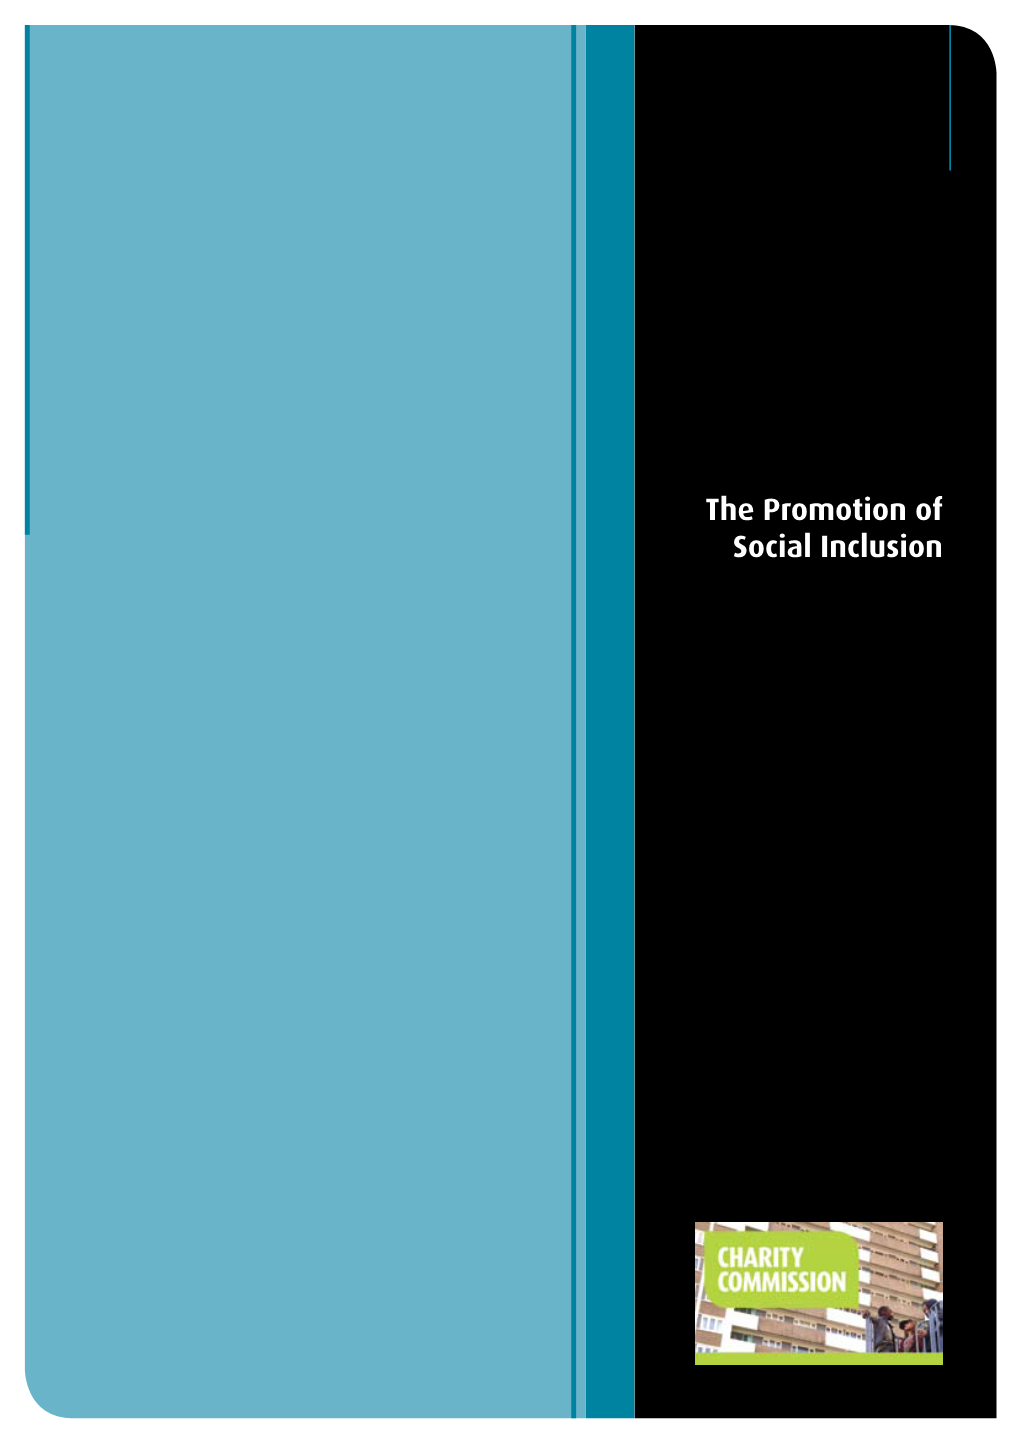 The Promotion of Social Inclusion the Charity Commission